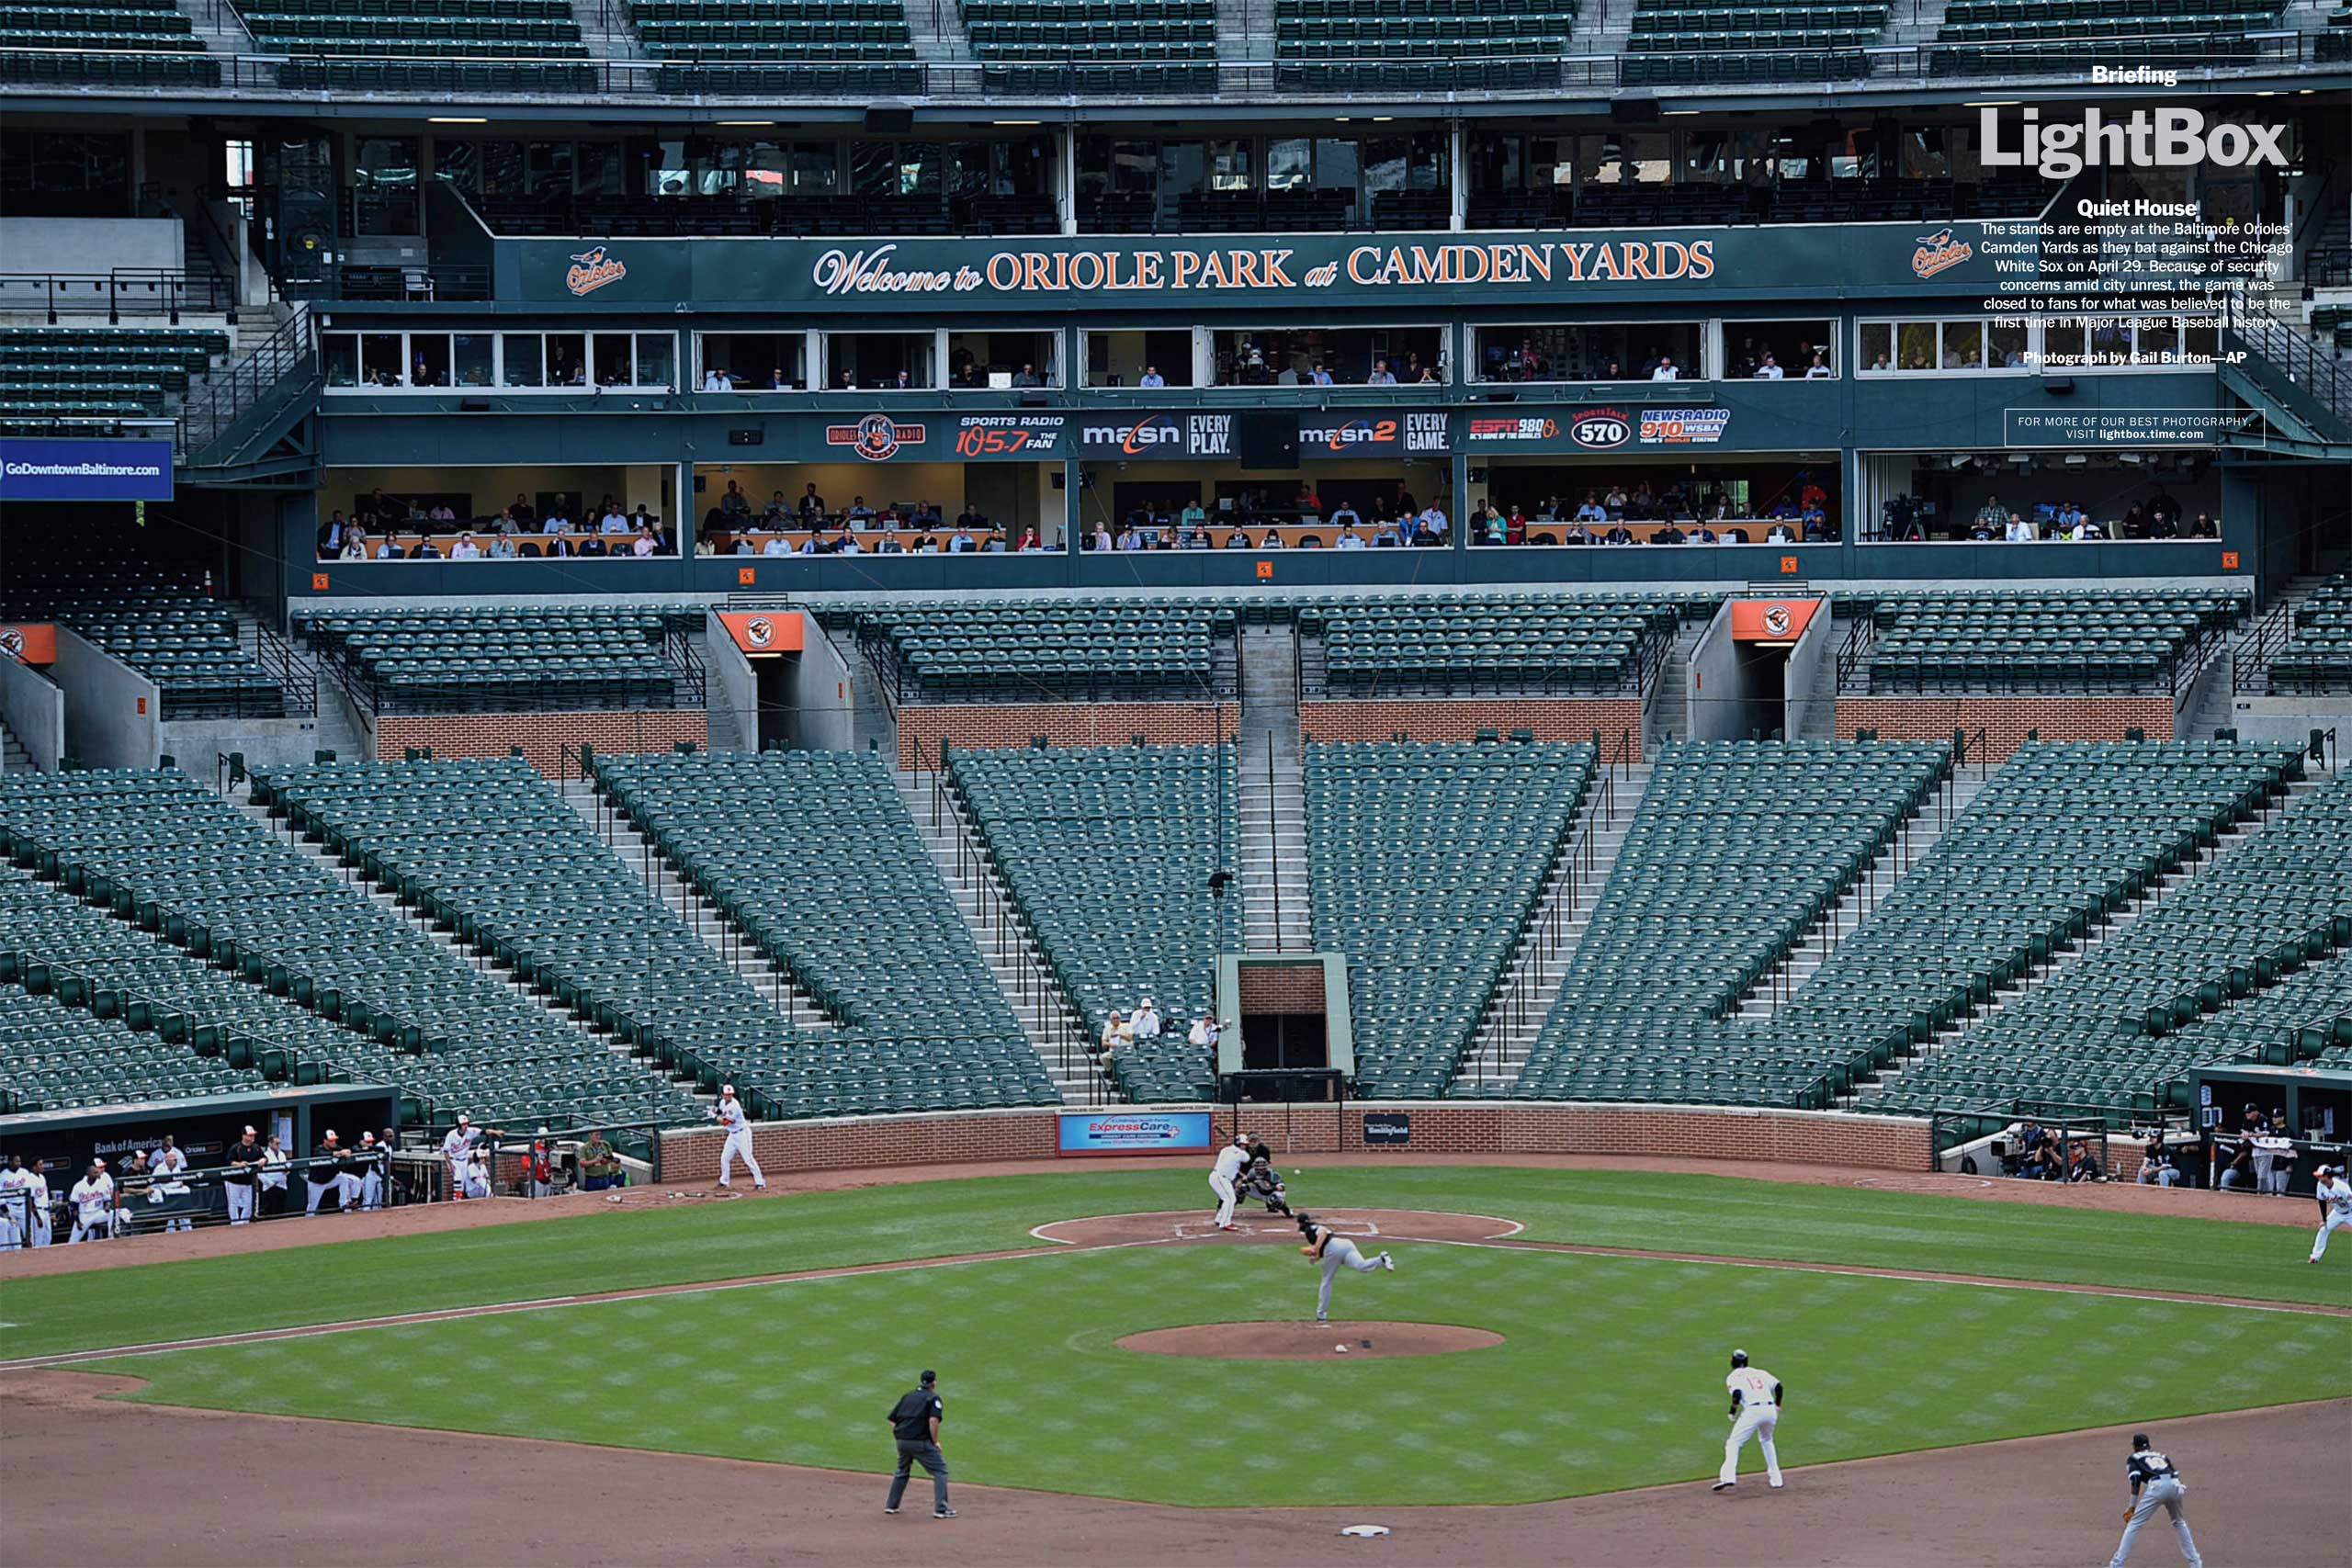 Photograph by Gail Burton—AP
                              The stands are empty at the Baltimore Orioles' Camden Yards as they bat against the Chicago White Sox on April 29. Because of security concerns amid city unrest, the game was closed to fans for what was believed to be the first time in Major League Baseball history. (TIME issue May 11, 2015)